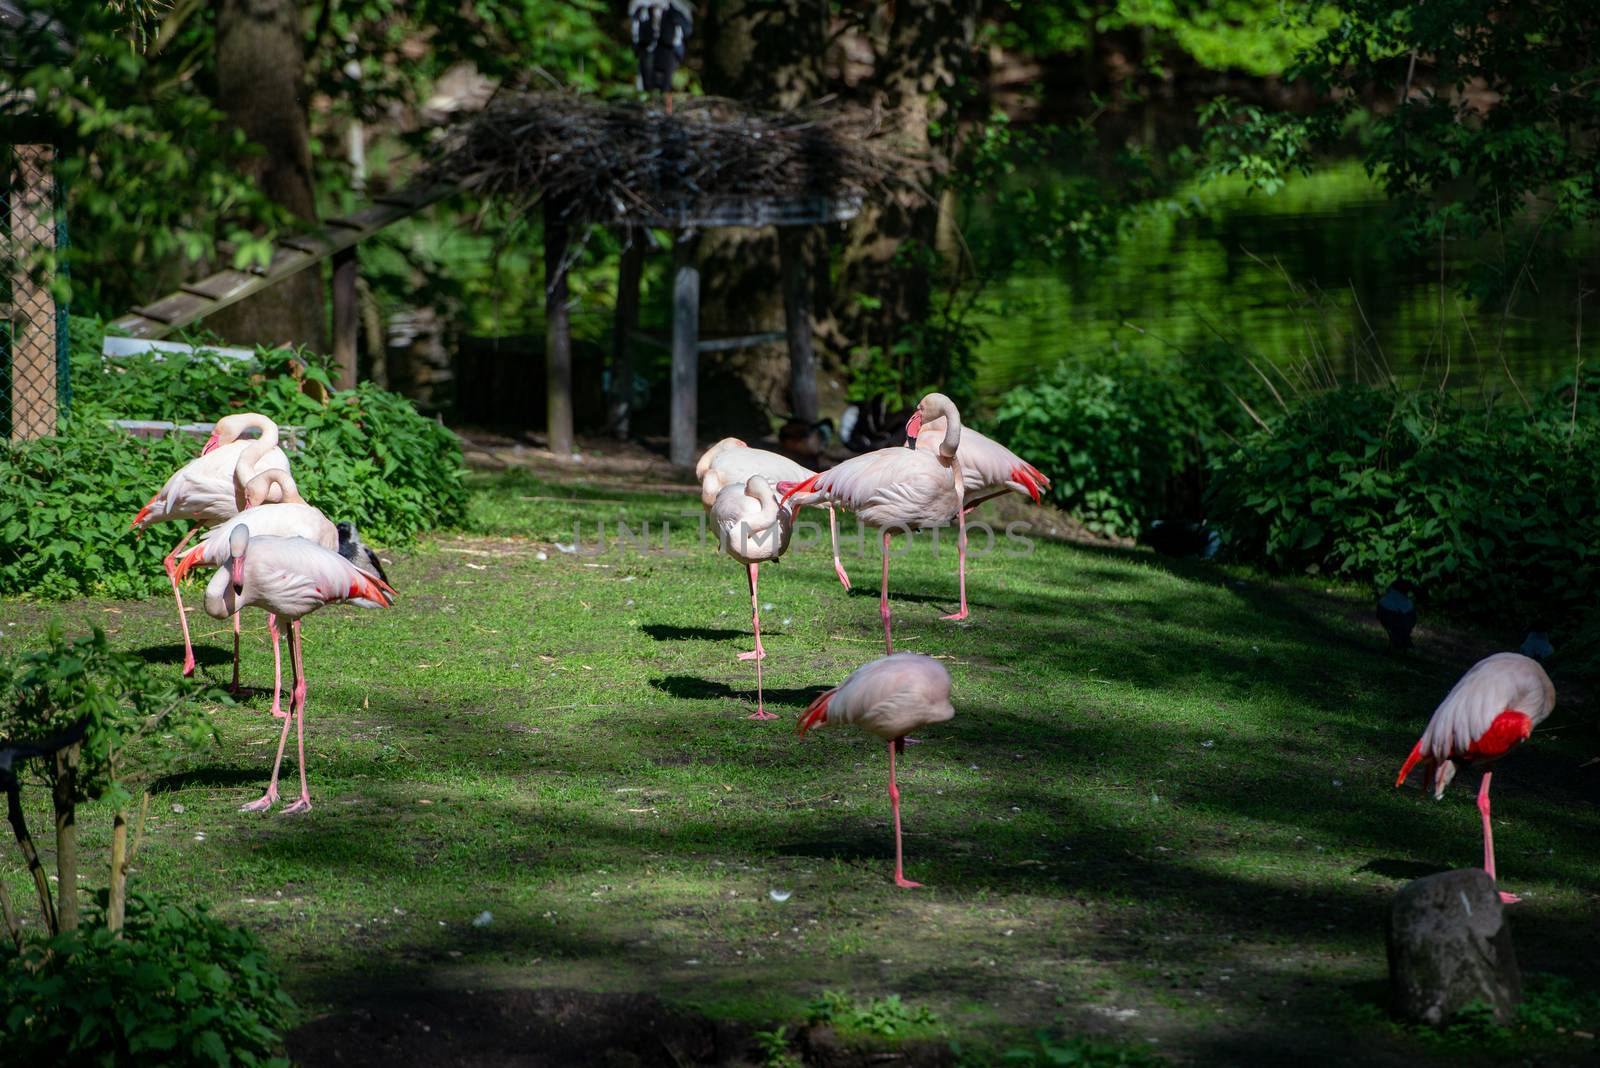 Many flamingos birds drink water in the forest